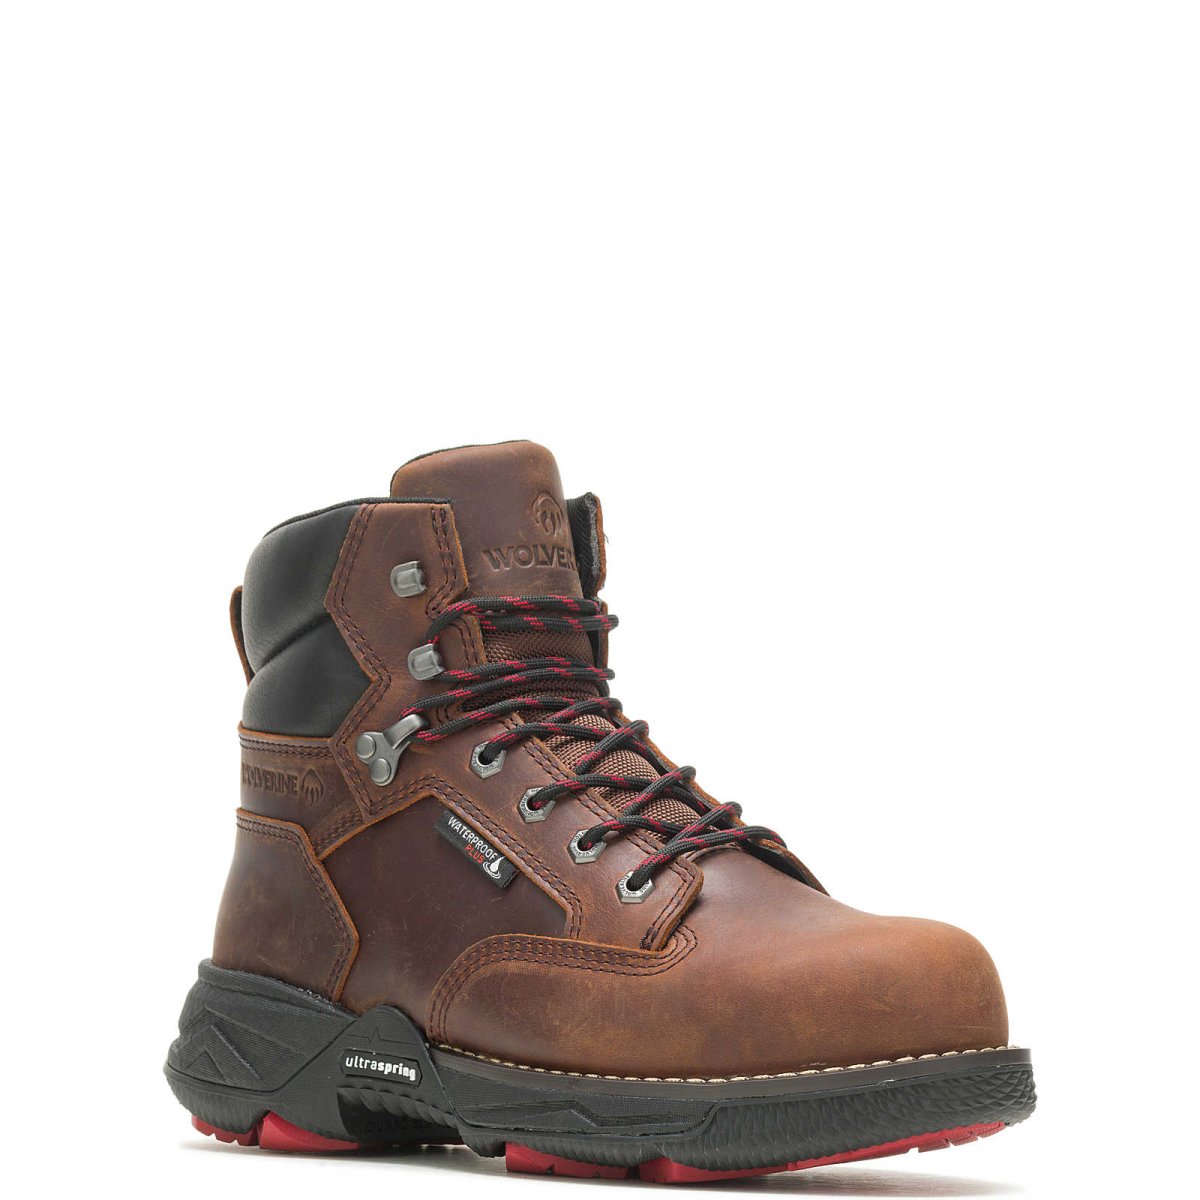 WOLVERINE HELLCAT FUSE USPRG MEN'S WORK BOOT (W221011) IN PEANUT - TLW Shoes